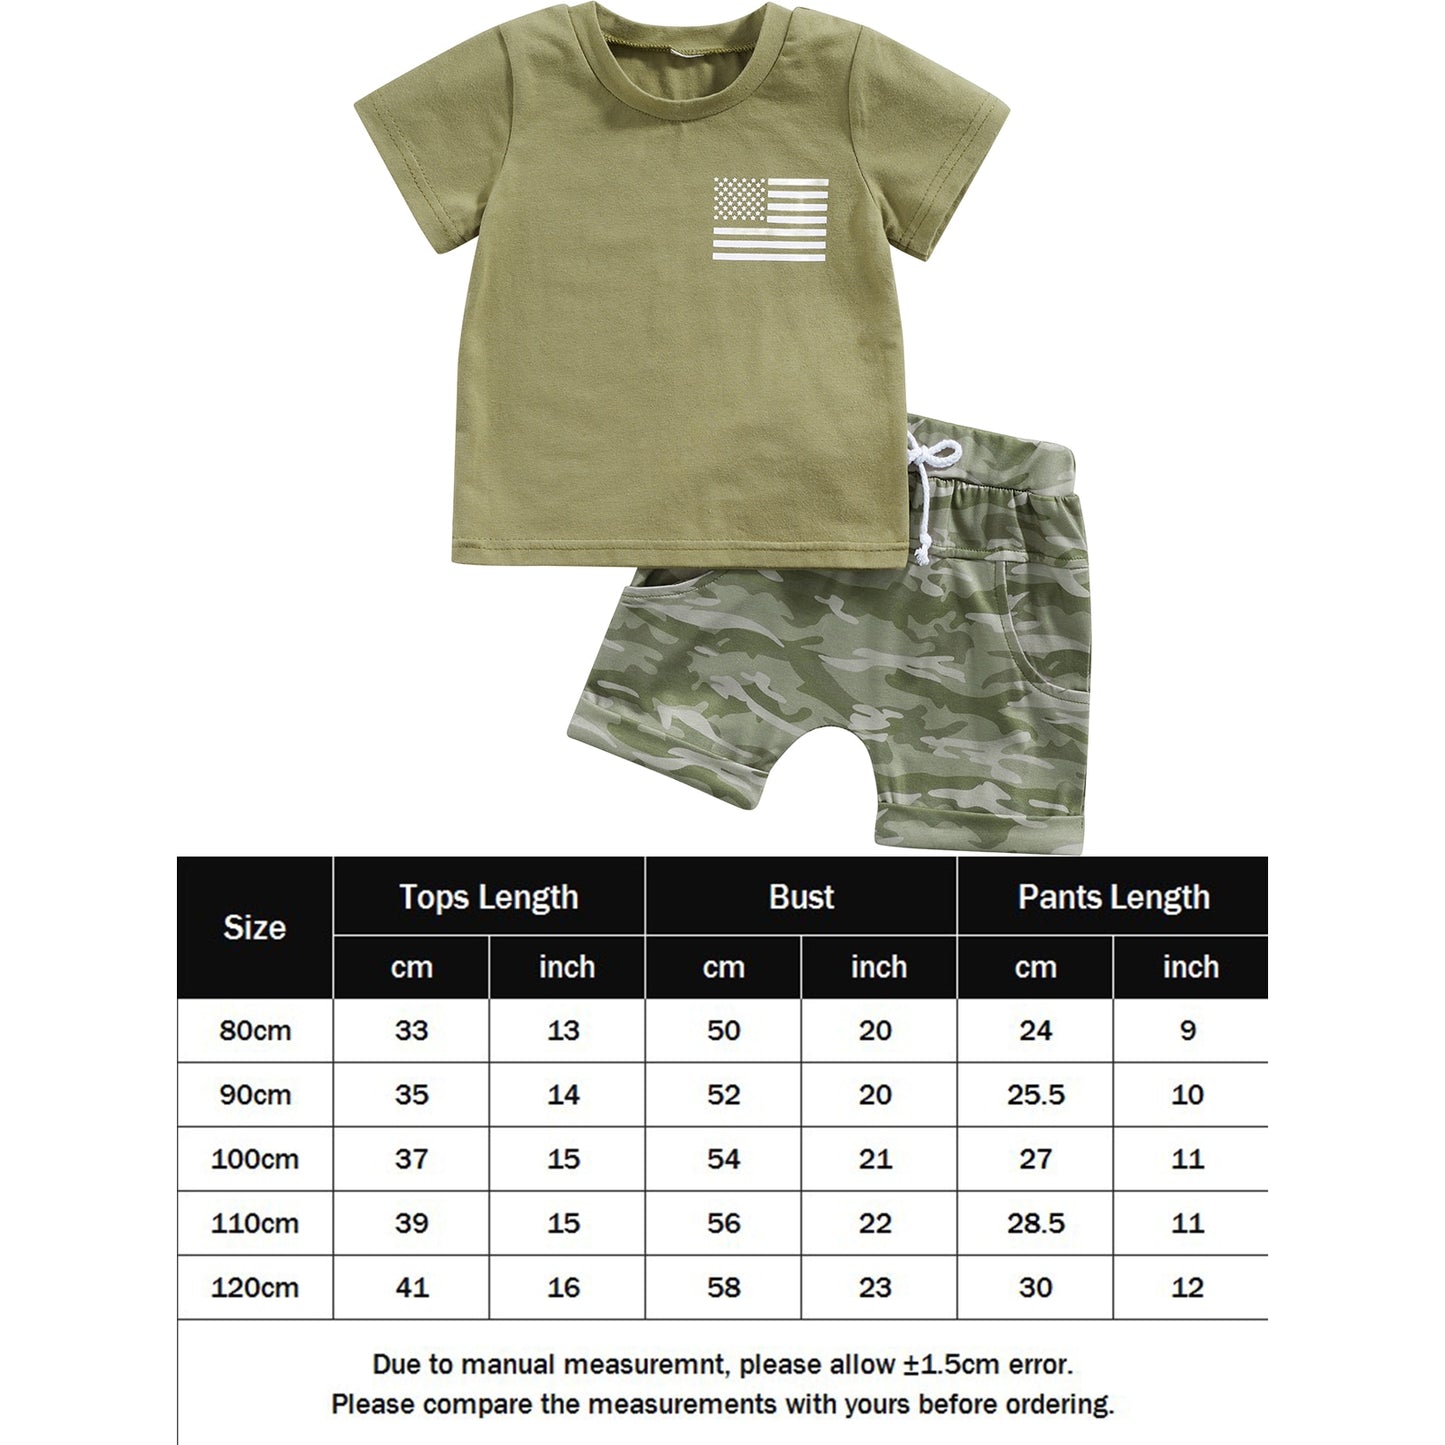 Toddler Boy Infant Clothing Independence Day Baby Boys USA Flag T-Shirt+Camouflage Shorts Drawstring Pockets 2 Piece Outfits